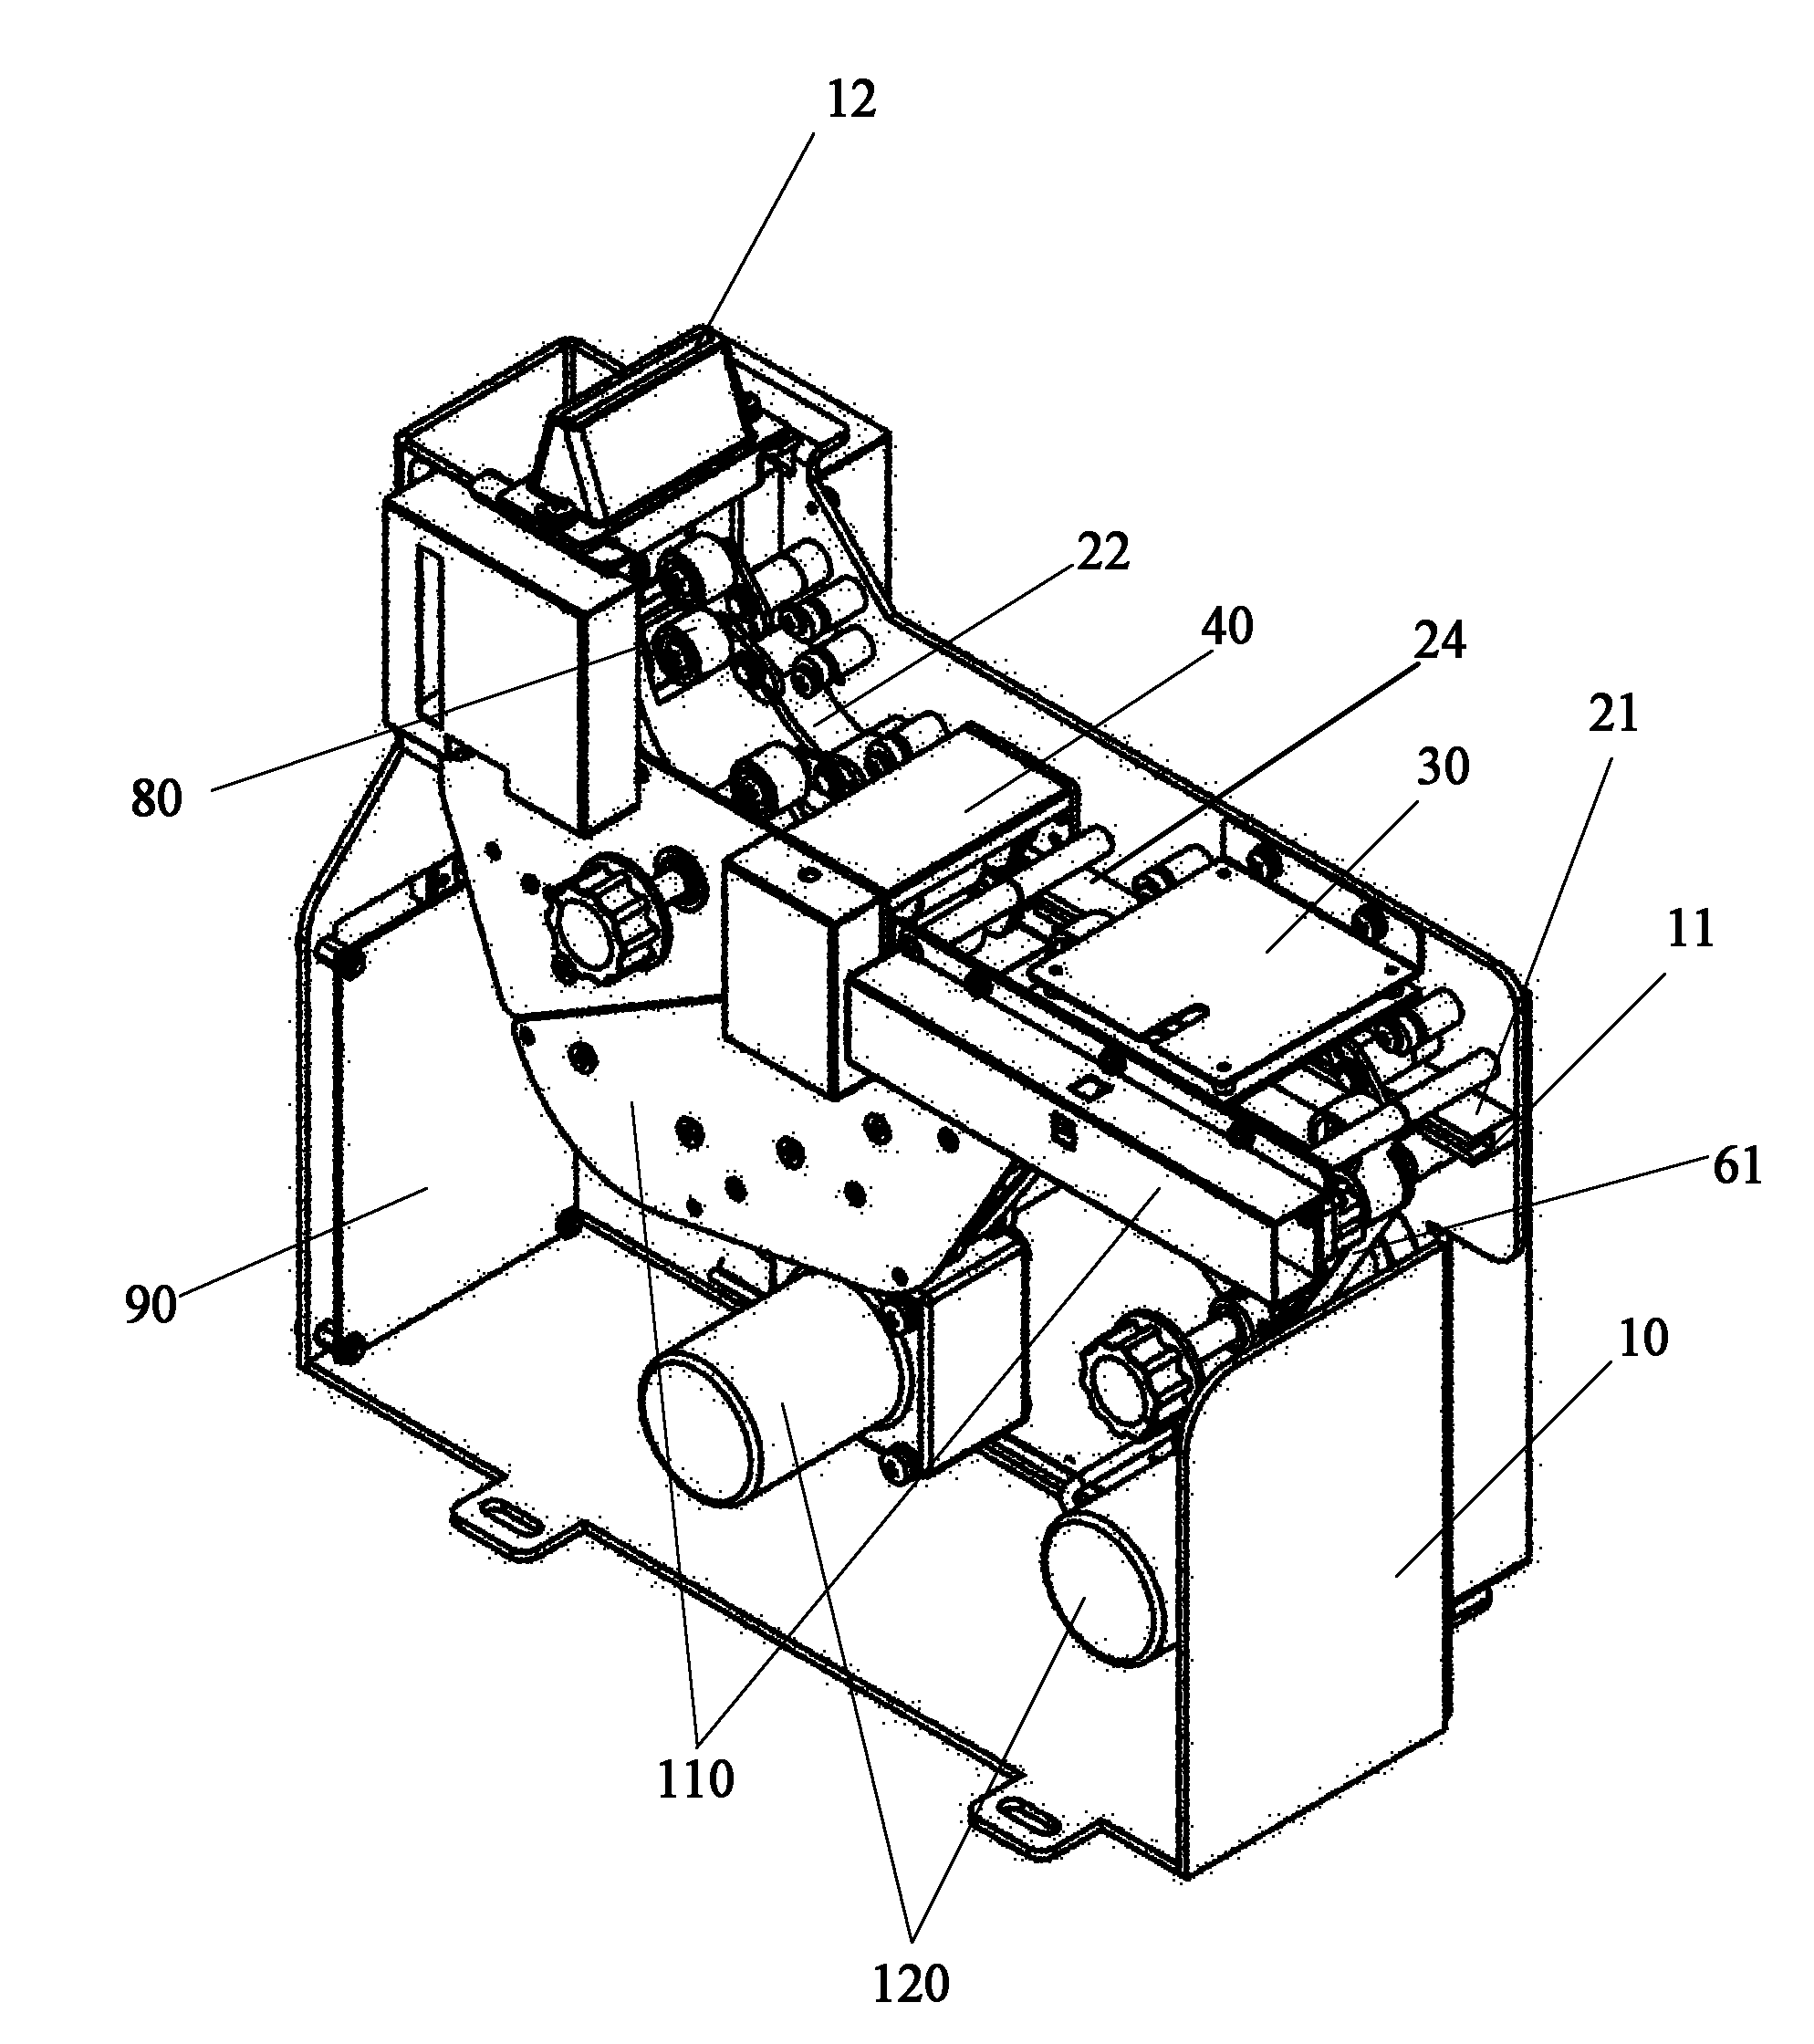 Automatic ticket feeding and discharging mechanism